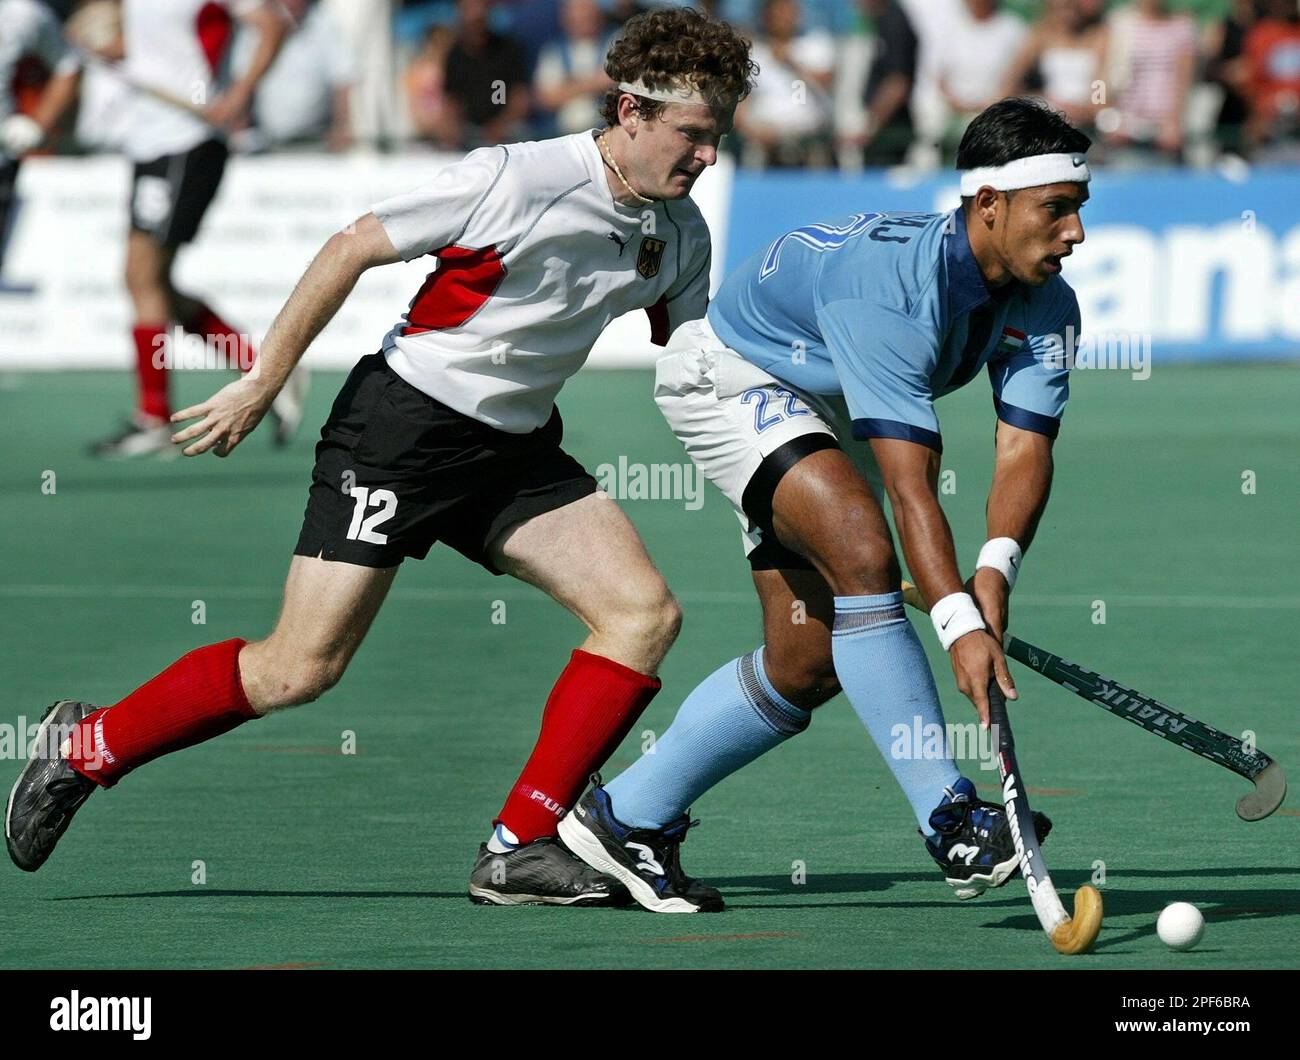 German hockey player Sebastian Biederlack, left, and Indian hockey player  Jugraj Singh, right, challenge for the ball during the hockey match between  India and Germany at the Hamburg's Masters Hockey tournament in